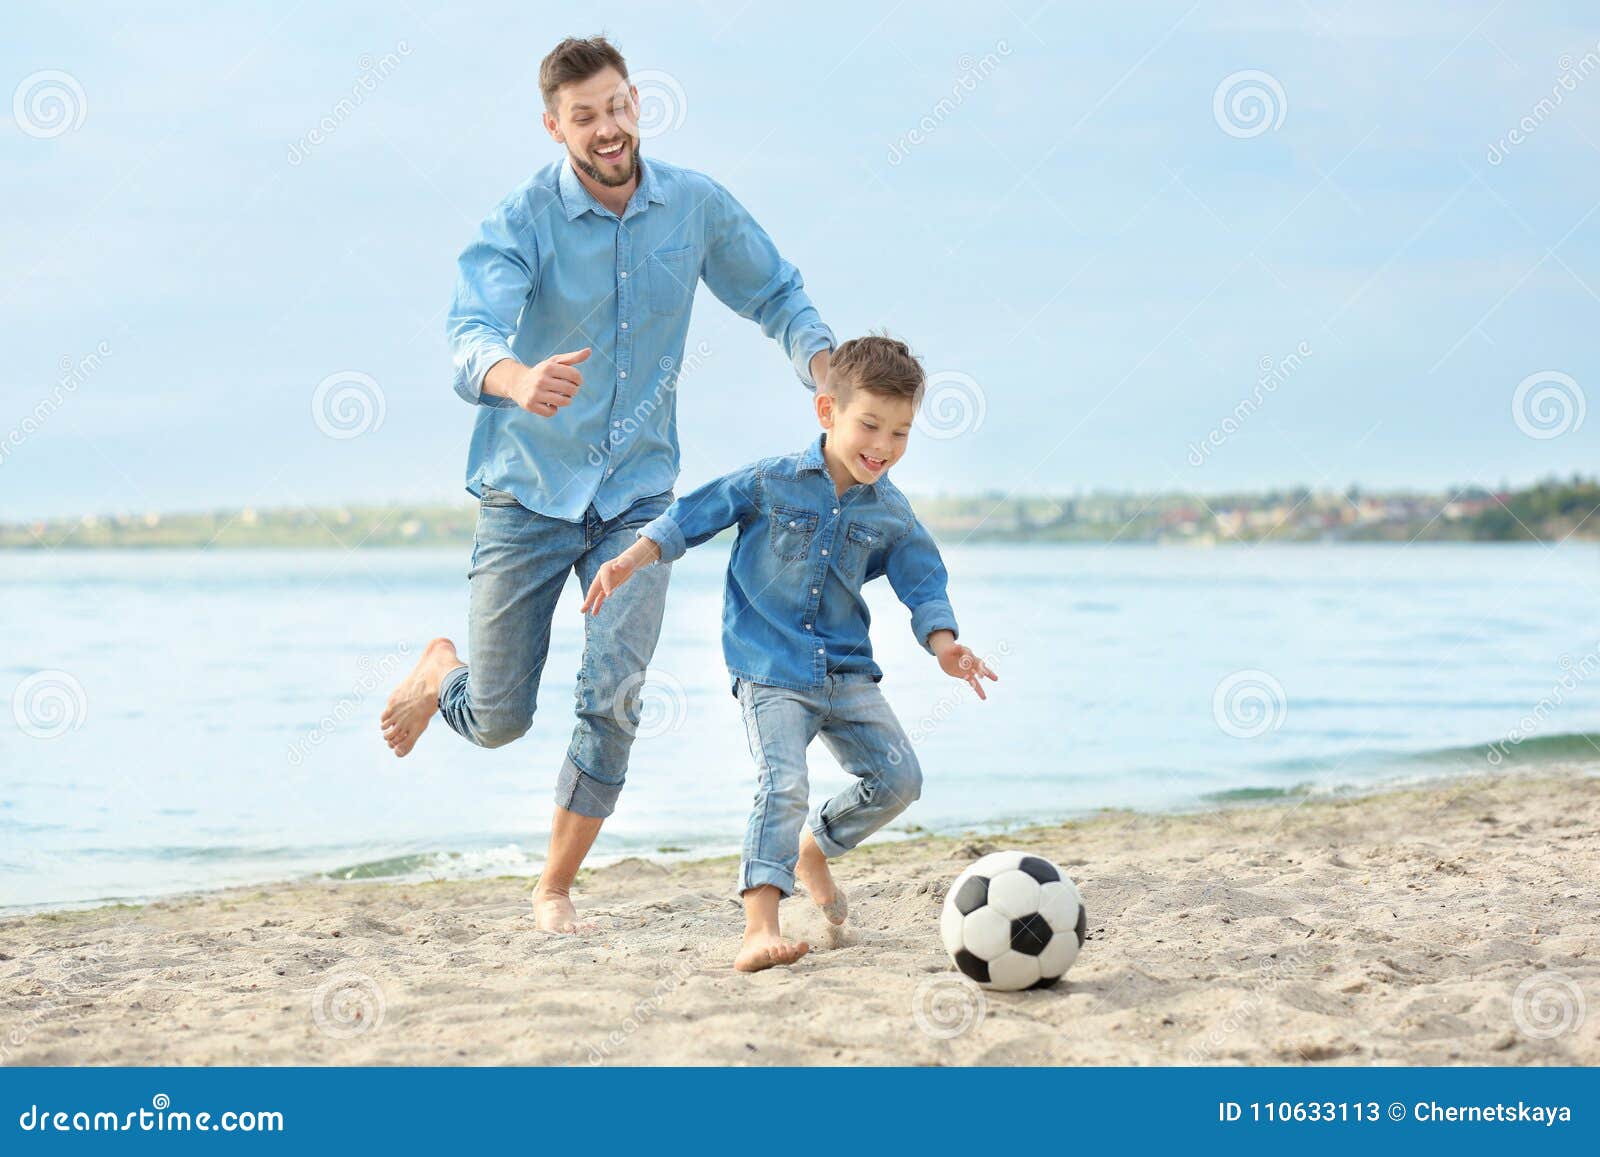 Dad and Son Playing Football Together Stock Image - Image of male